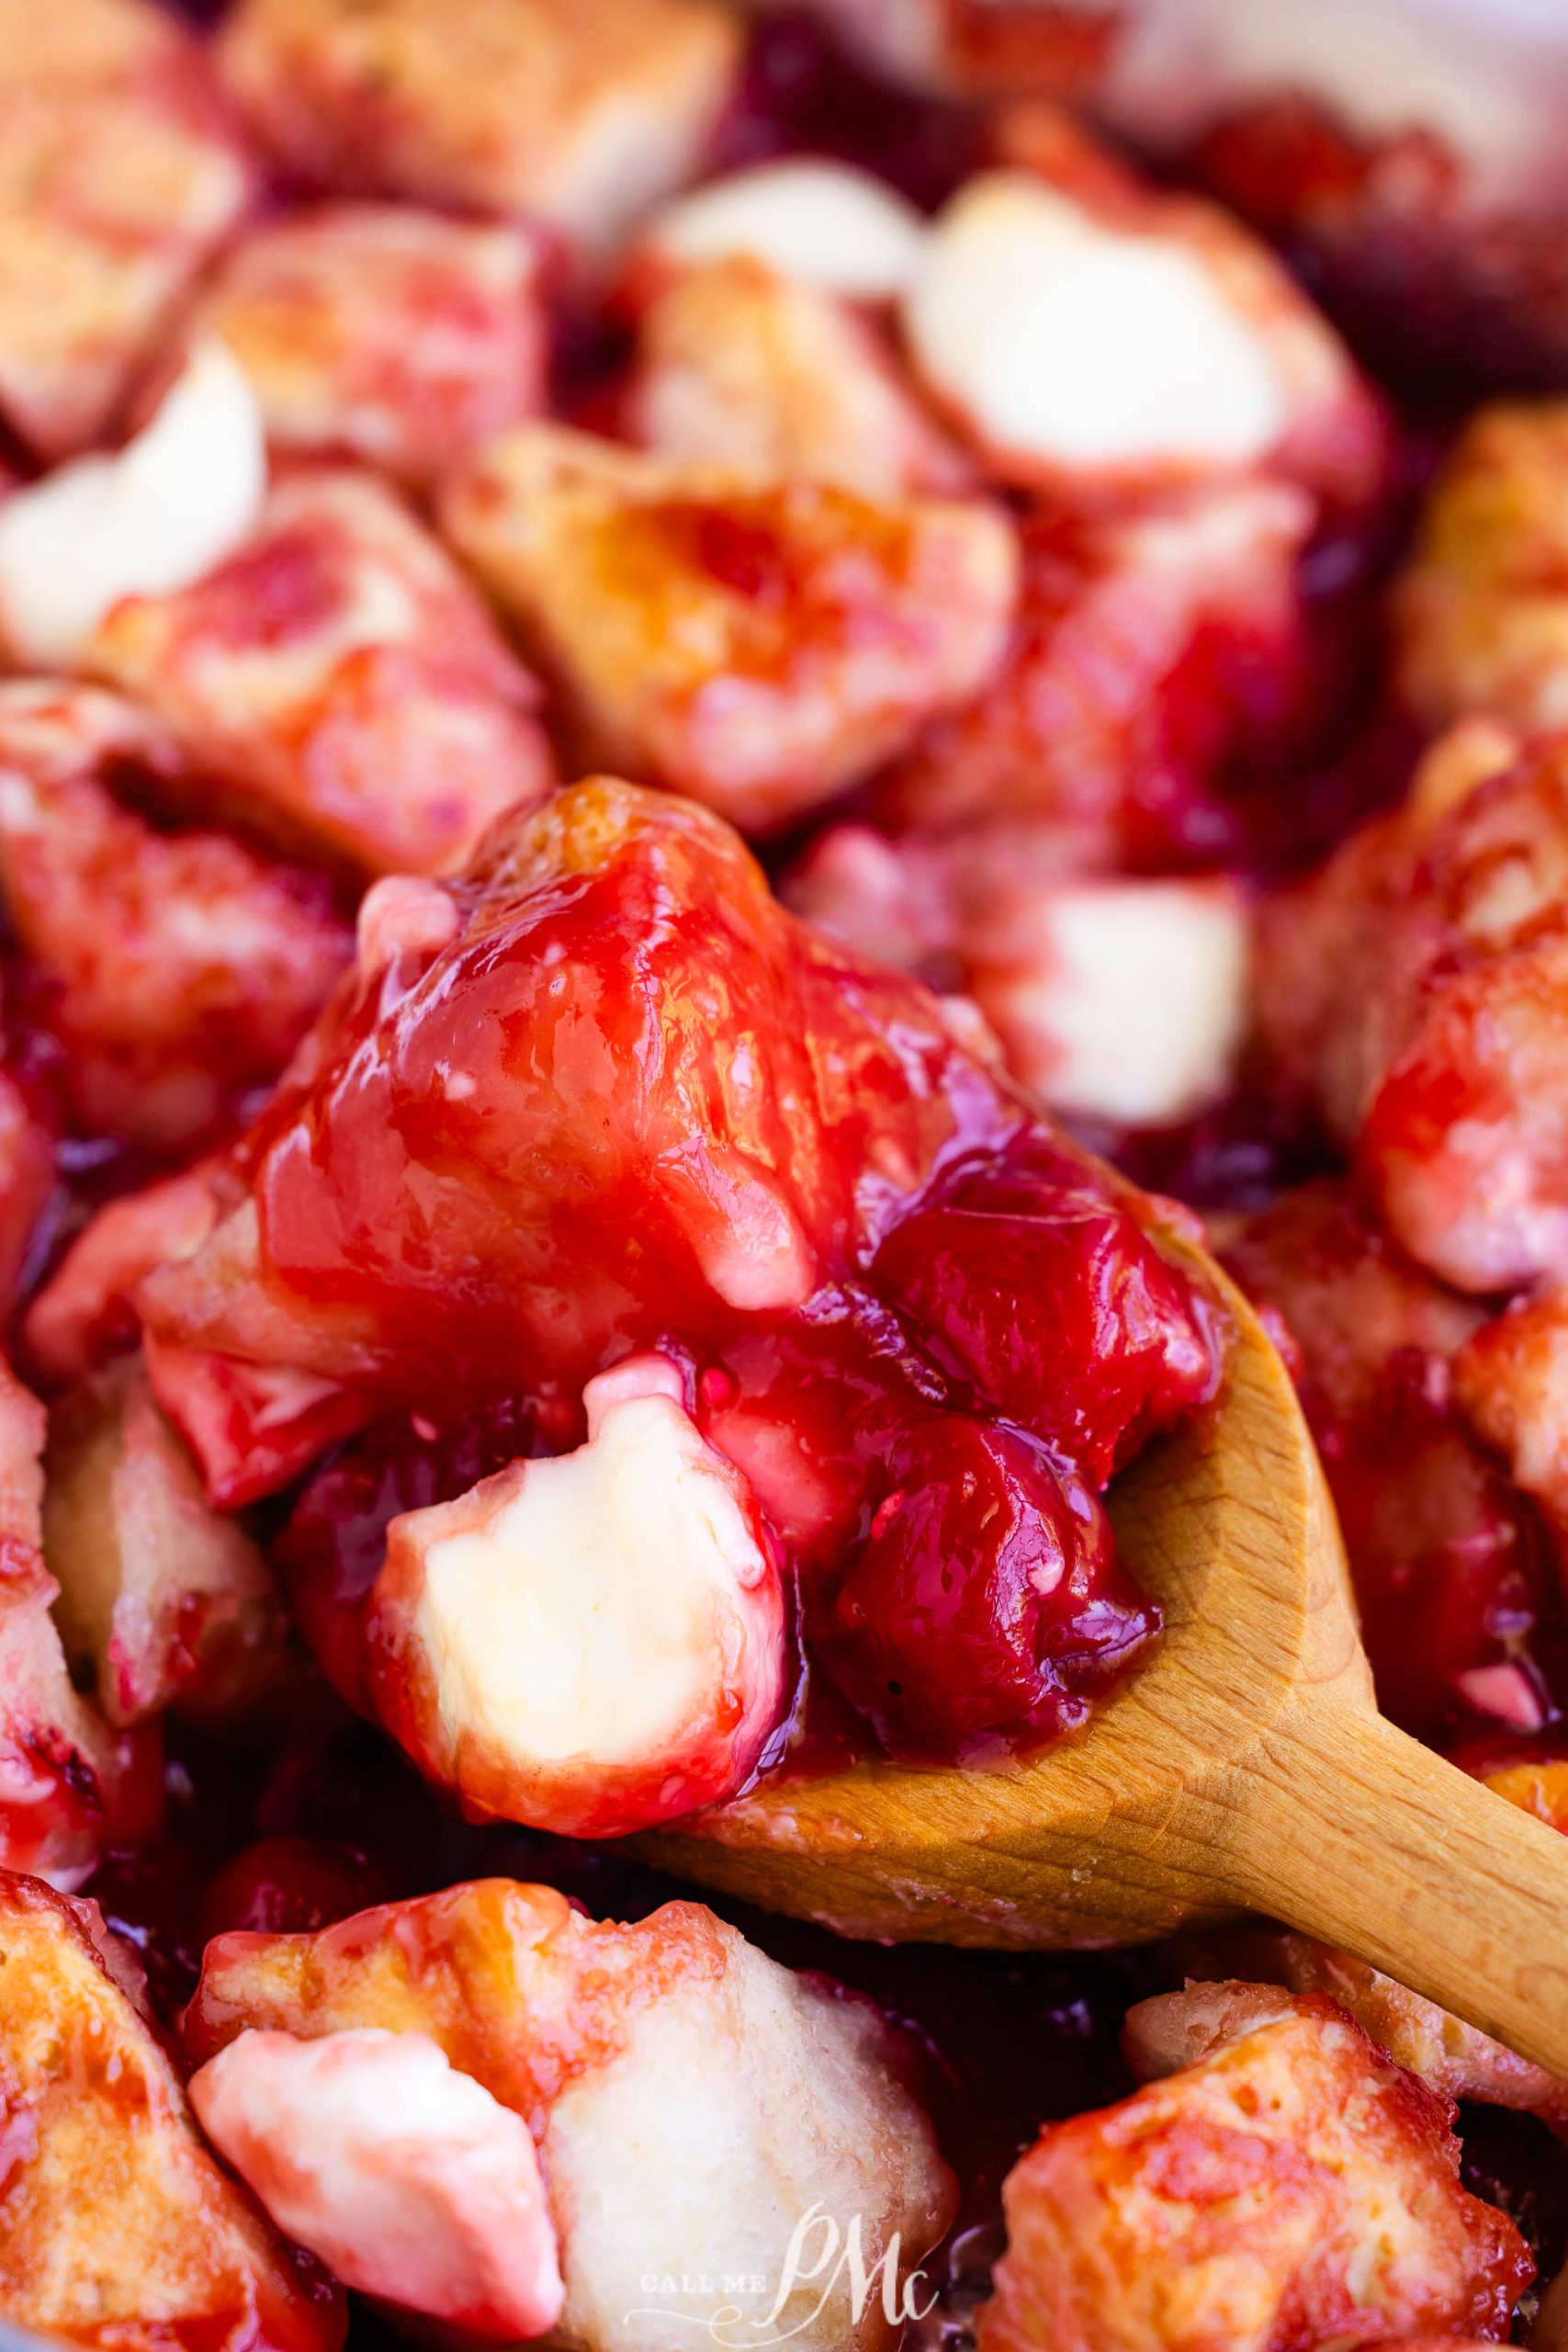 Close-up of a wooden spoon serving a mixed berry bread pudding, showing chunks of bread, creamy white cheese, and vibrant red mixed berries.